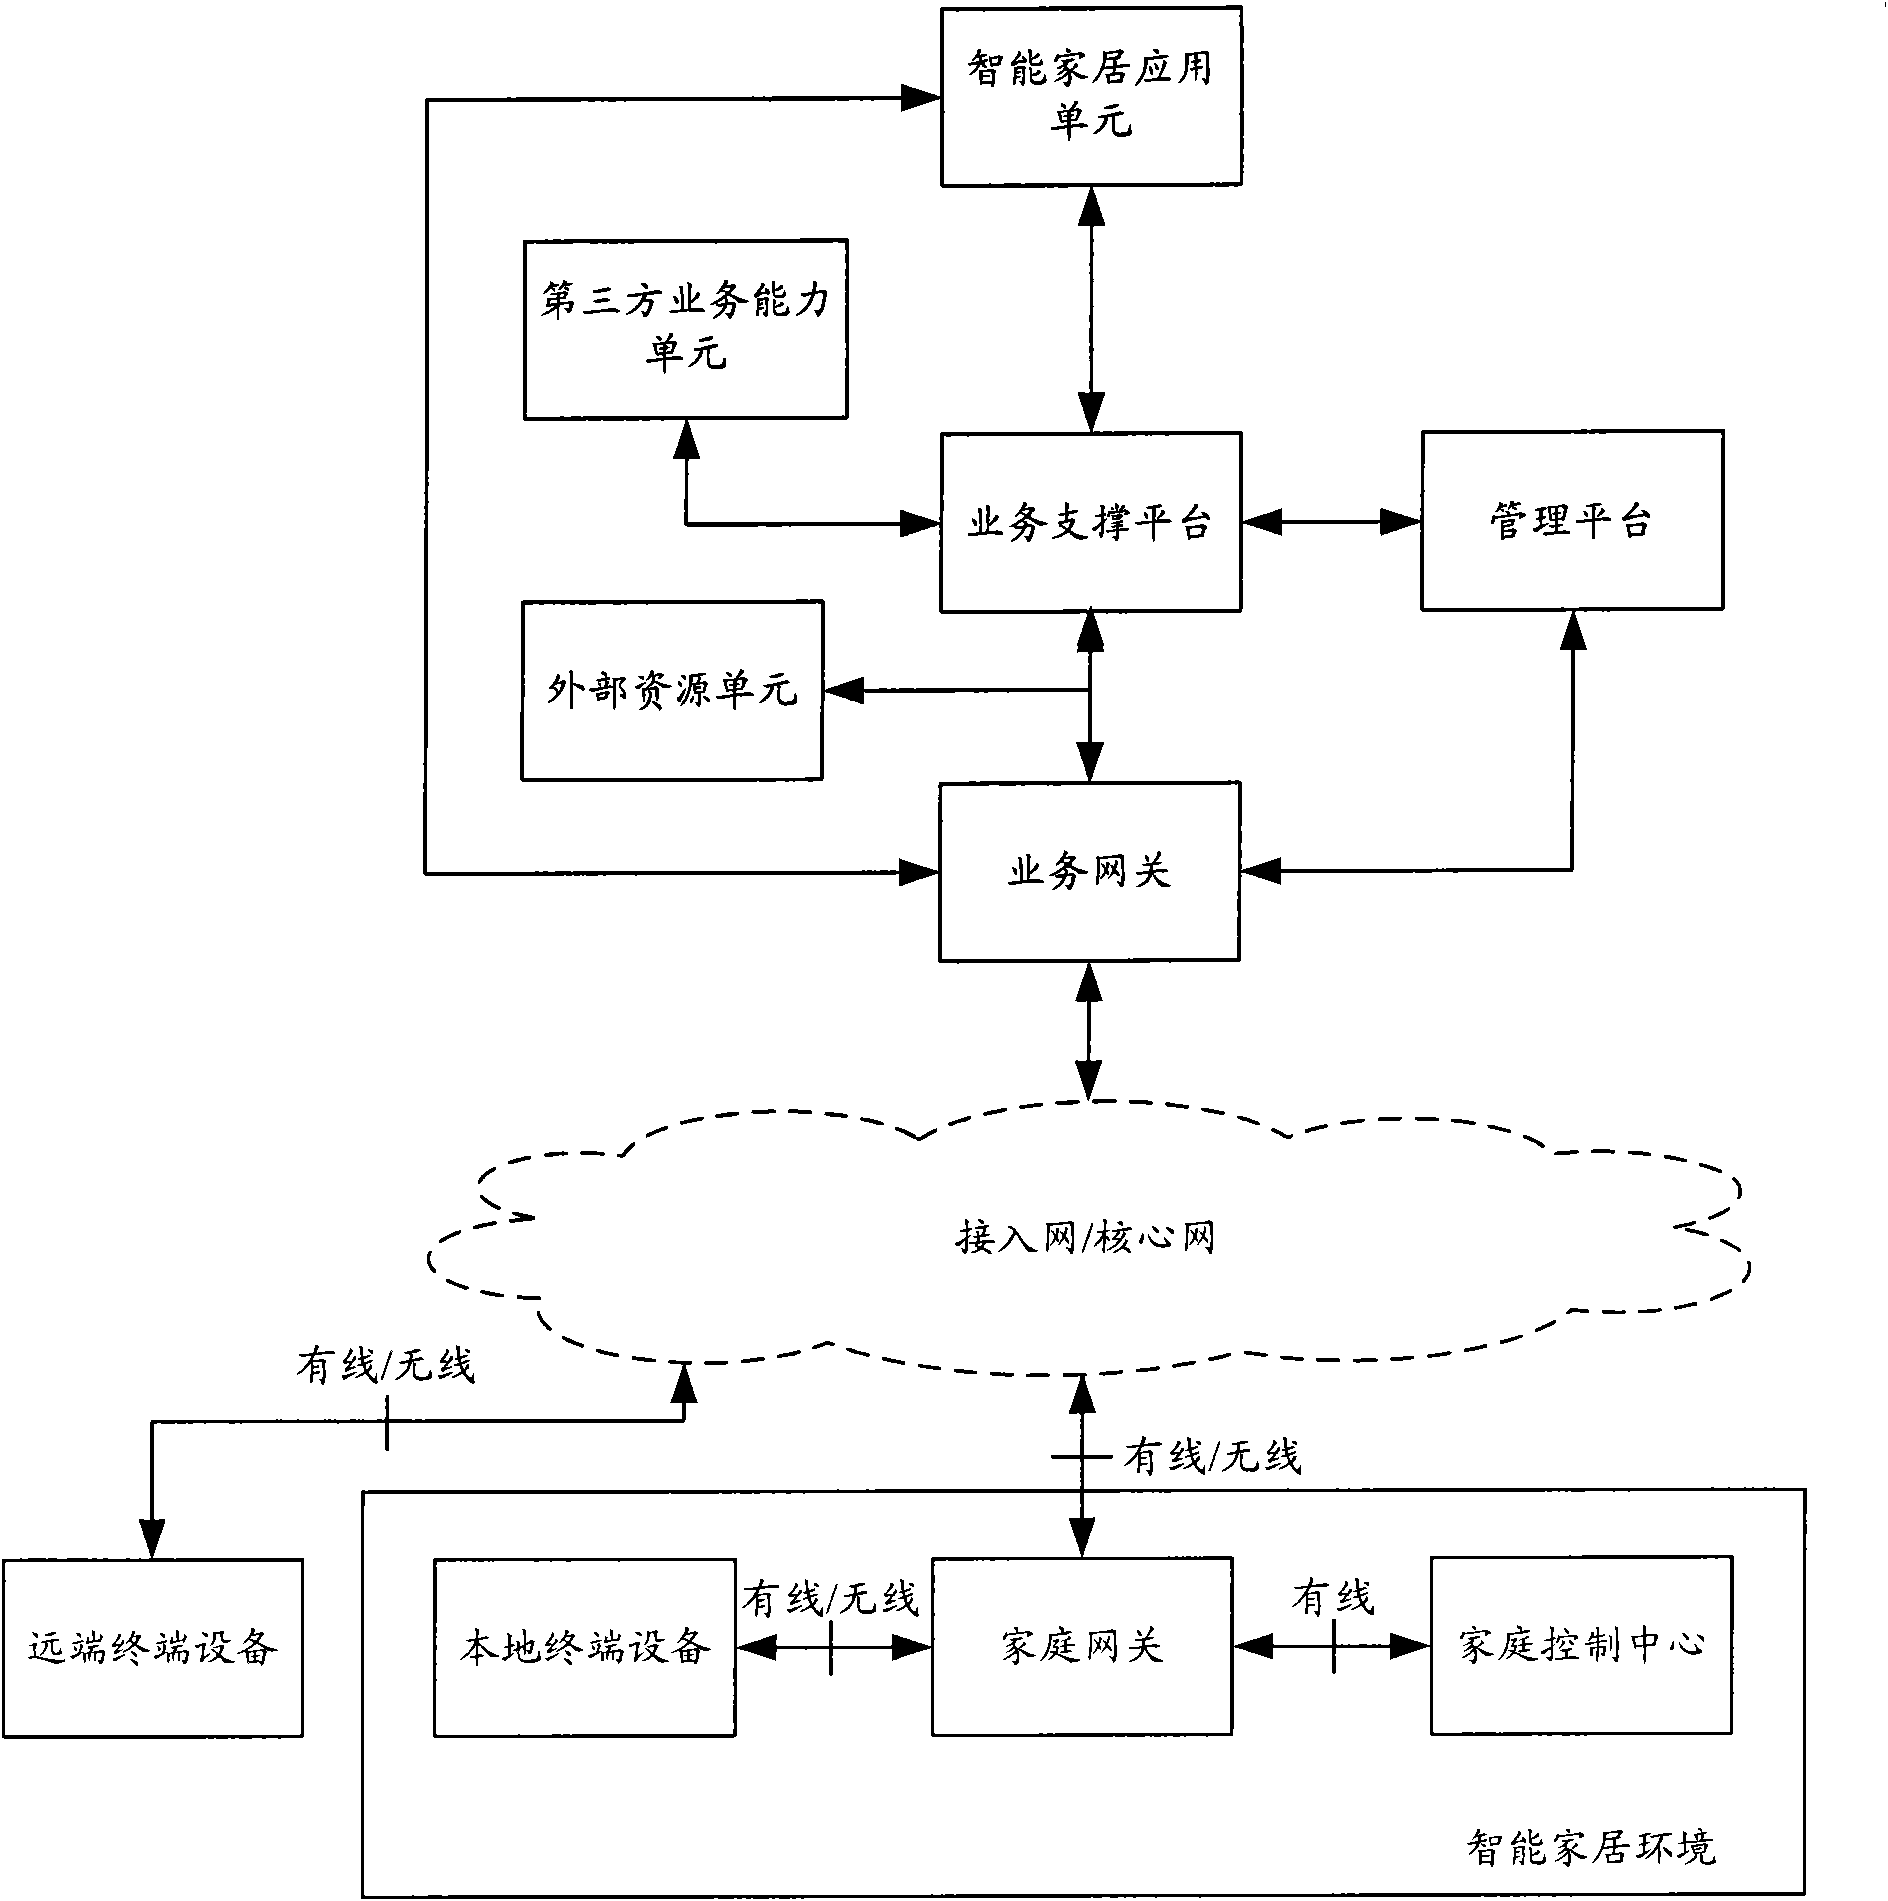 Device, system and method for realizing intelligent home application